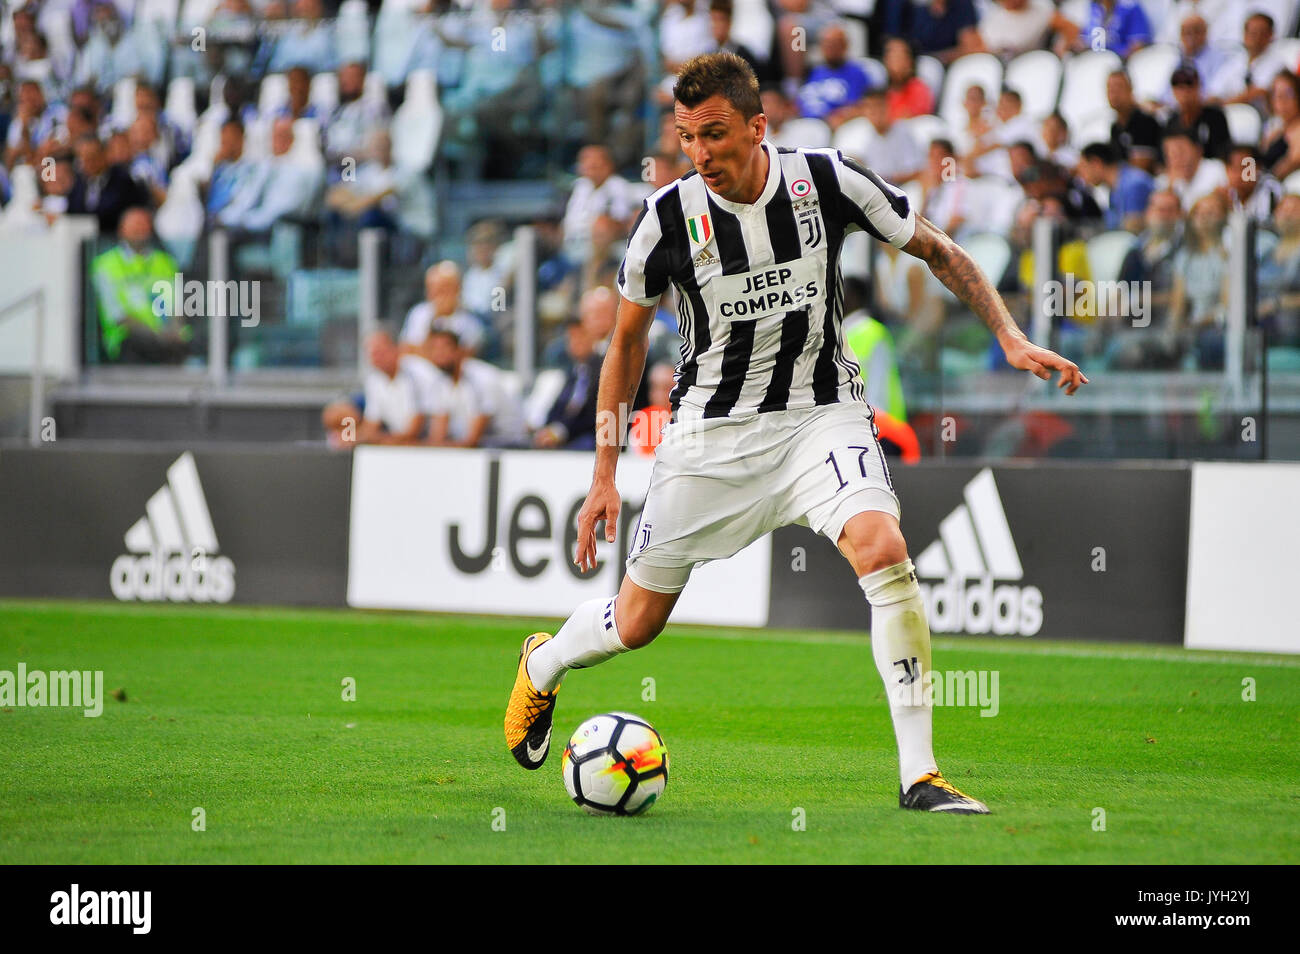 Turin, Italy. 19th August, 2017. Mario Mandzukic (Juventus FC) during the  match Serie A TIM between Juventus FC and Cagliari Calcio at Allianz  Stadium Torino. The final result of the match is